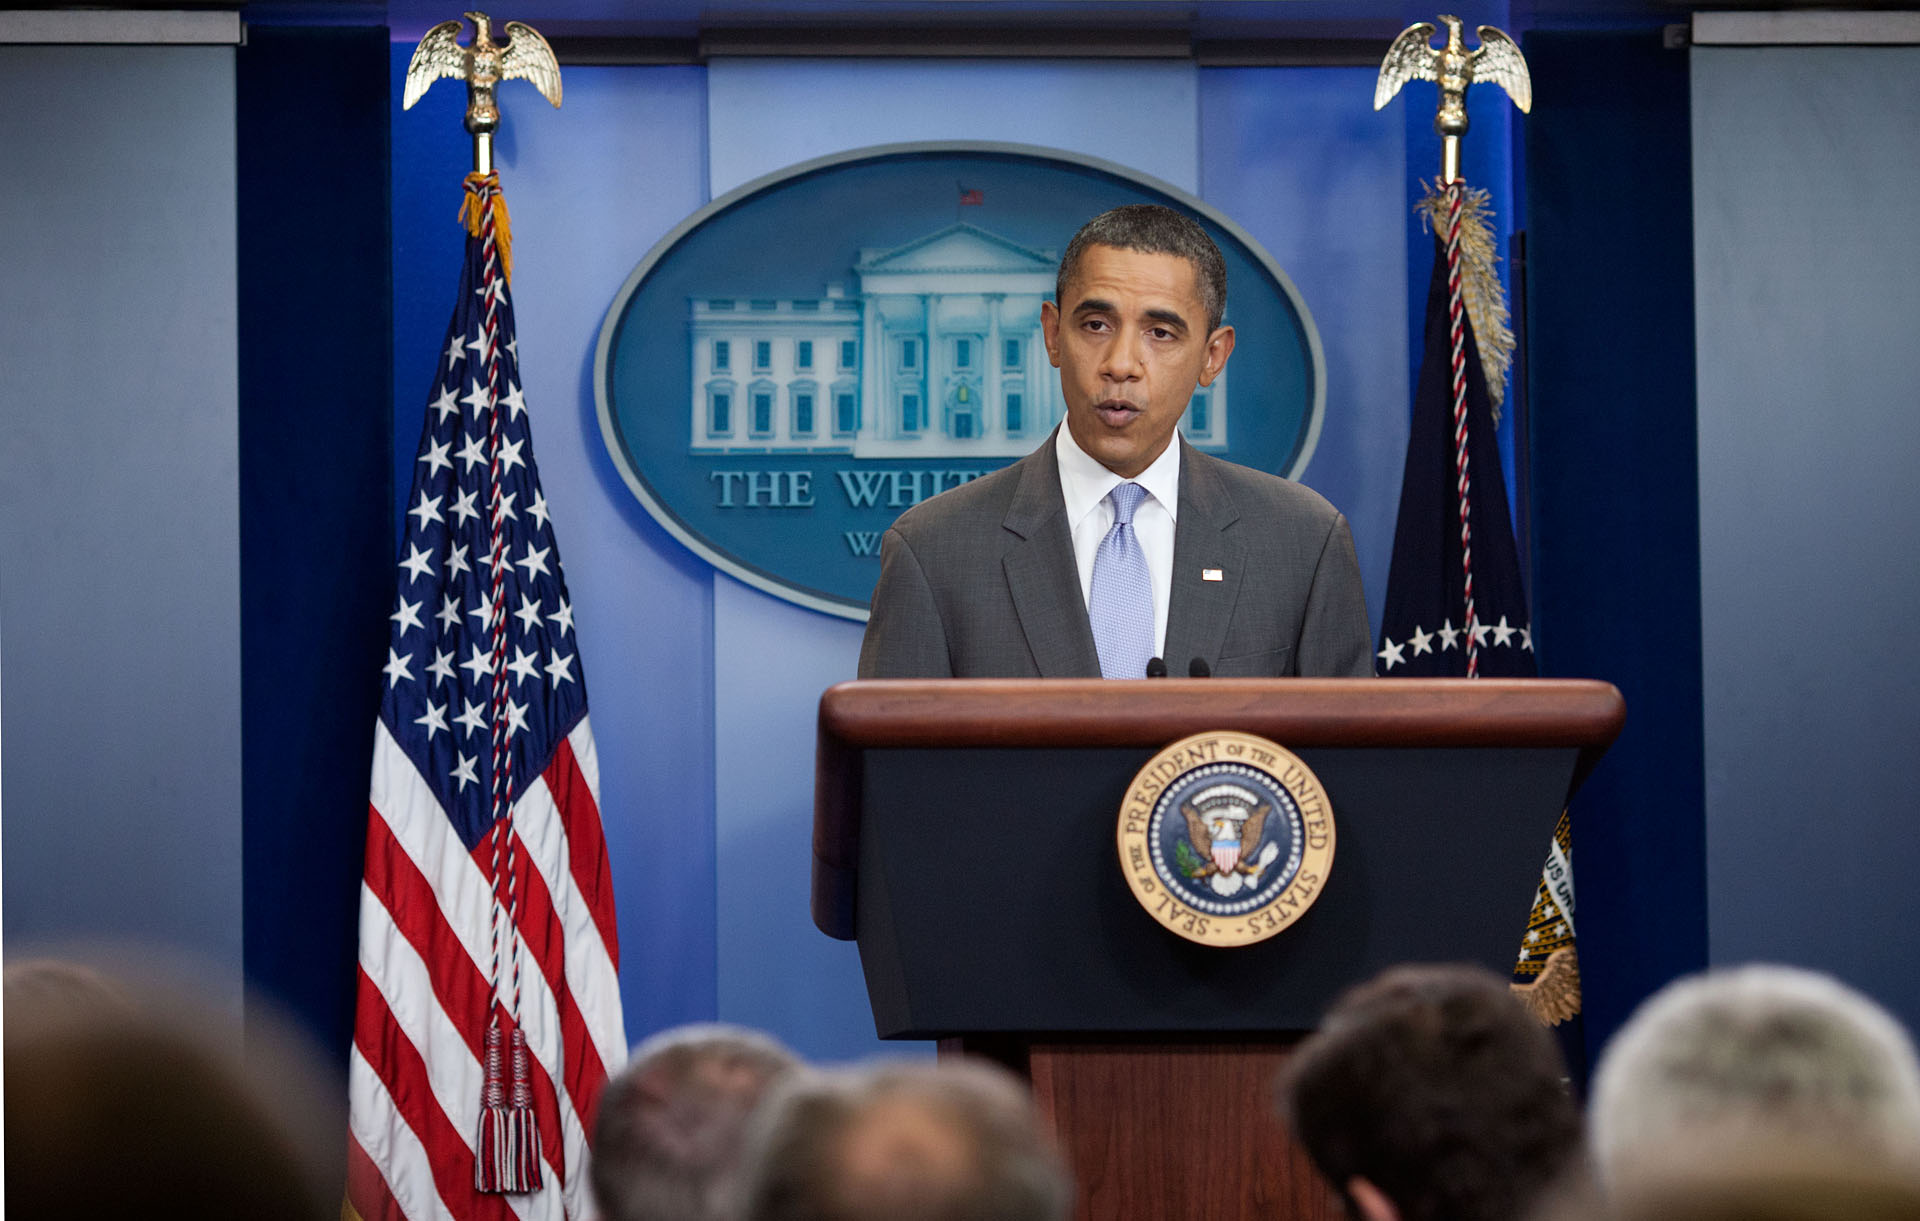 President Barack Obama makes a statement announcing a deal in the ongoing efforts to find a balanced approach to the debt limit and deficit reduction